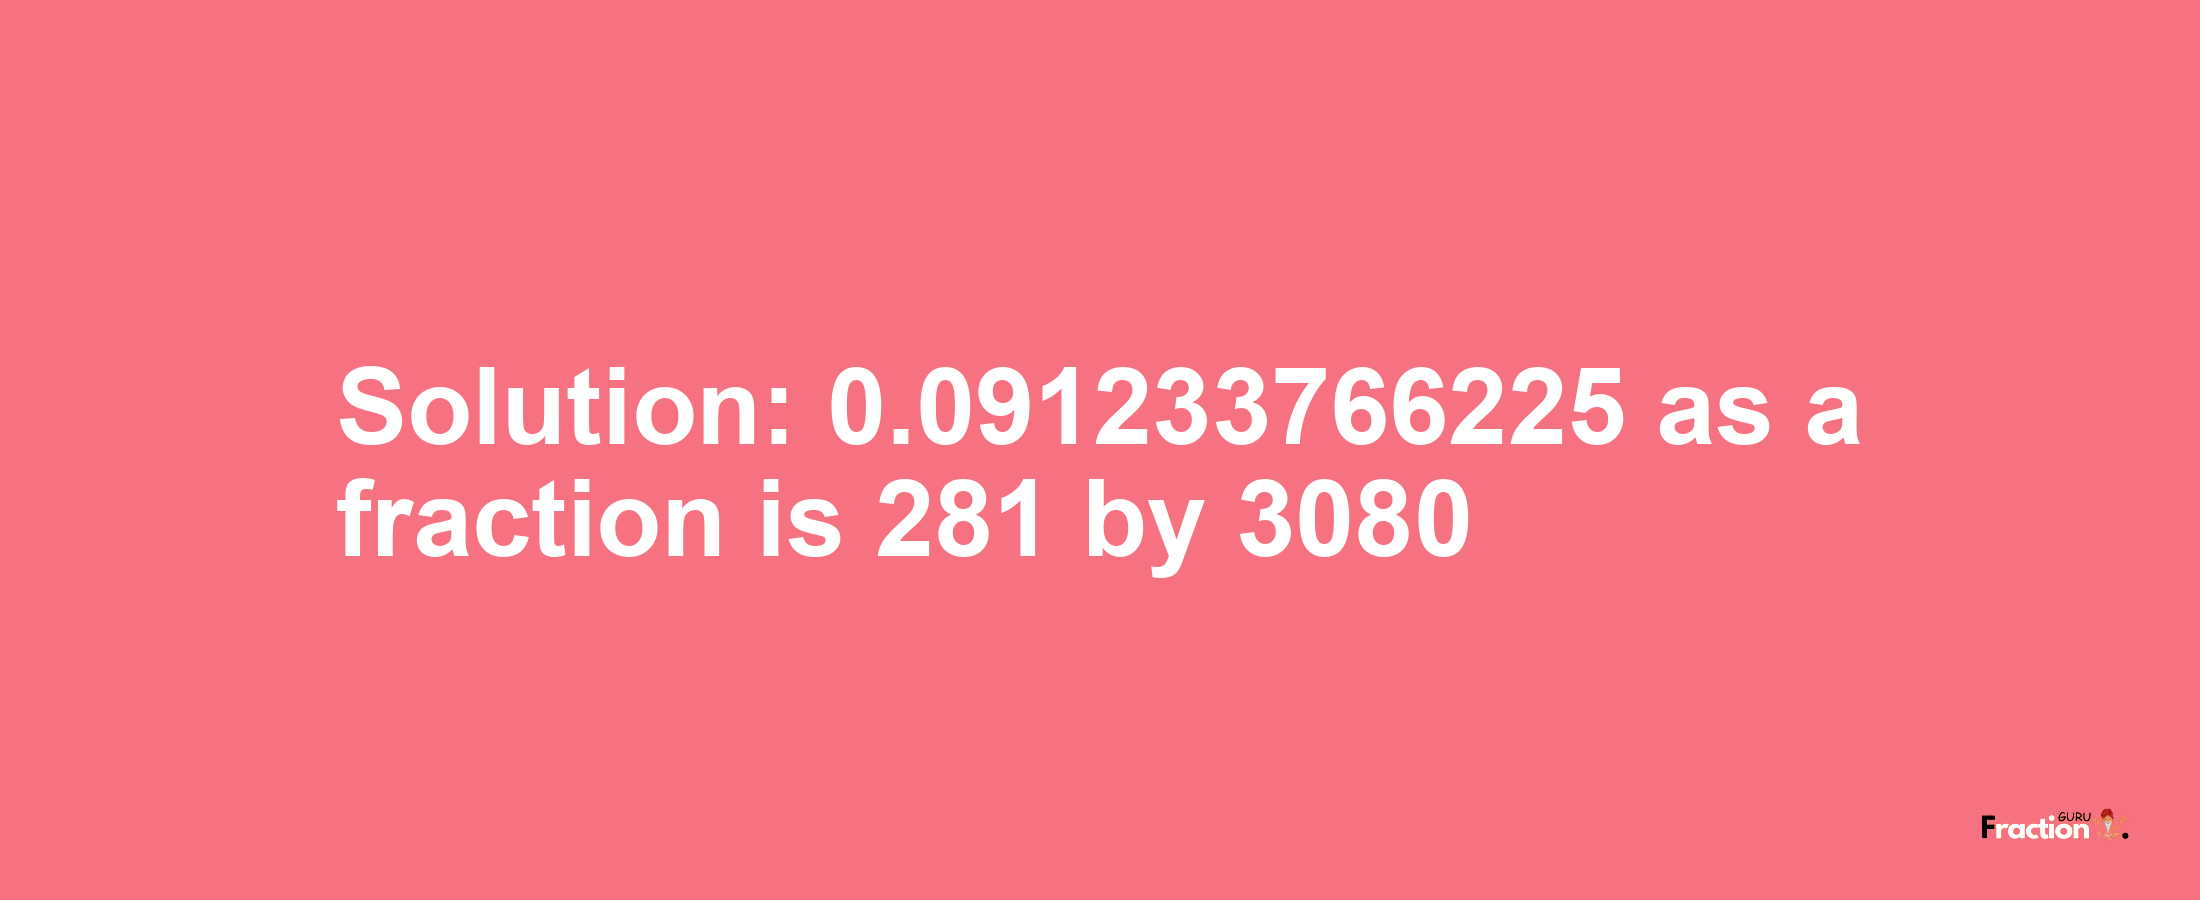 Solution:0.091233766225 as a fraction is 281/3080